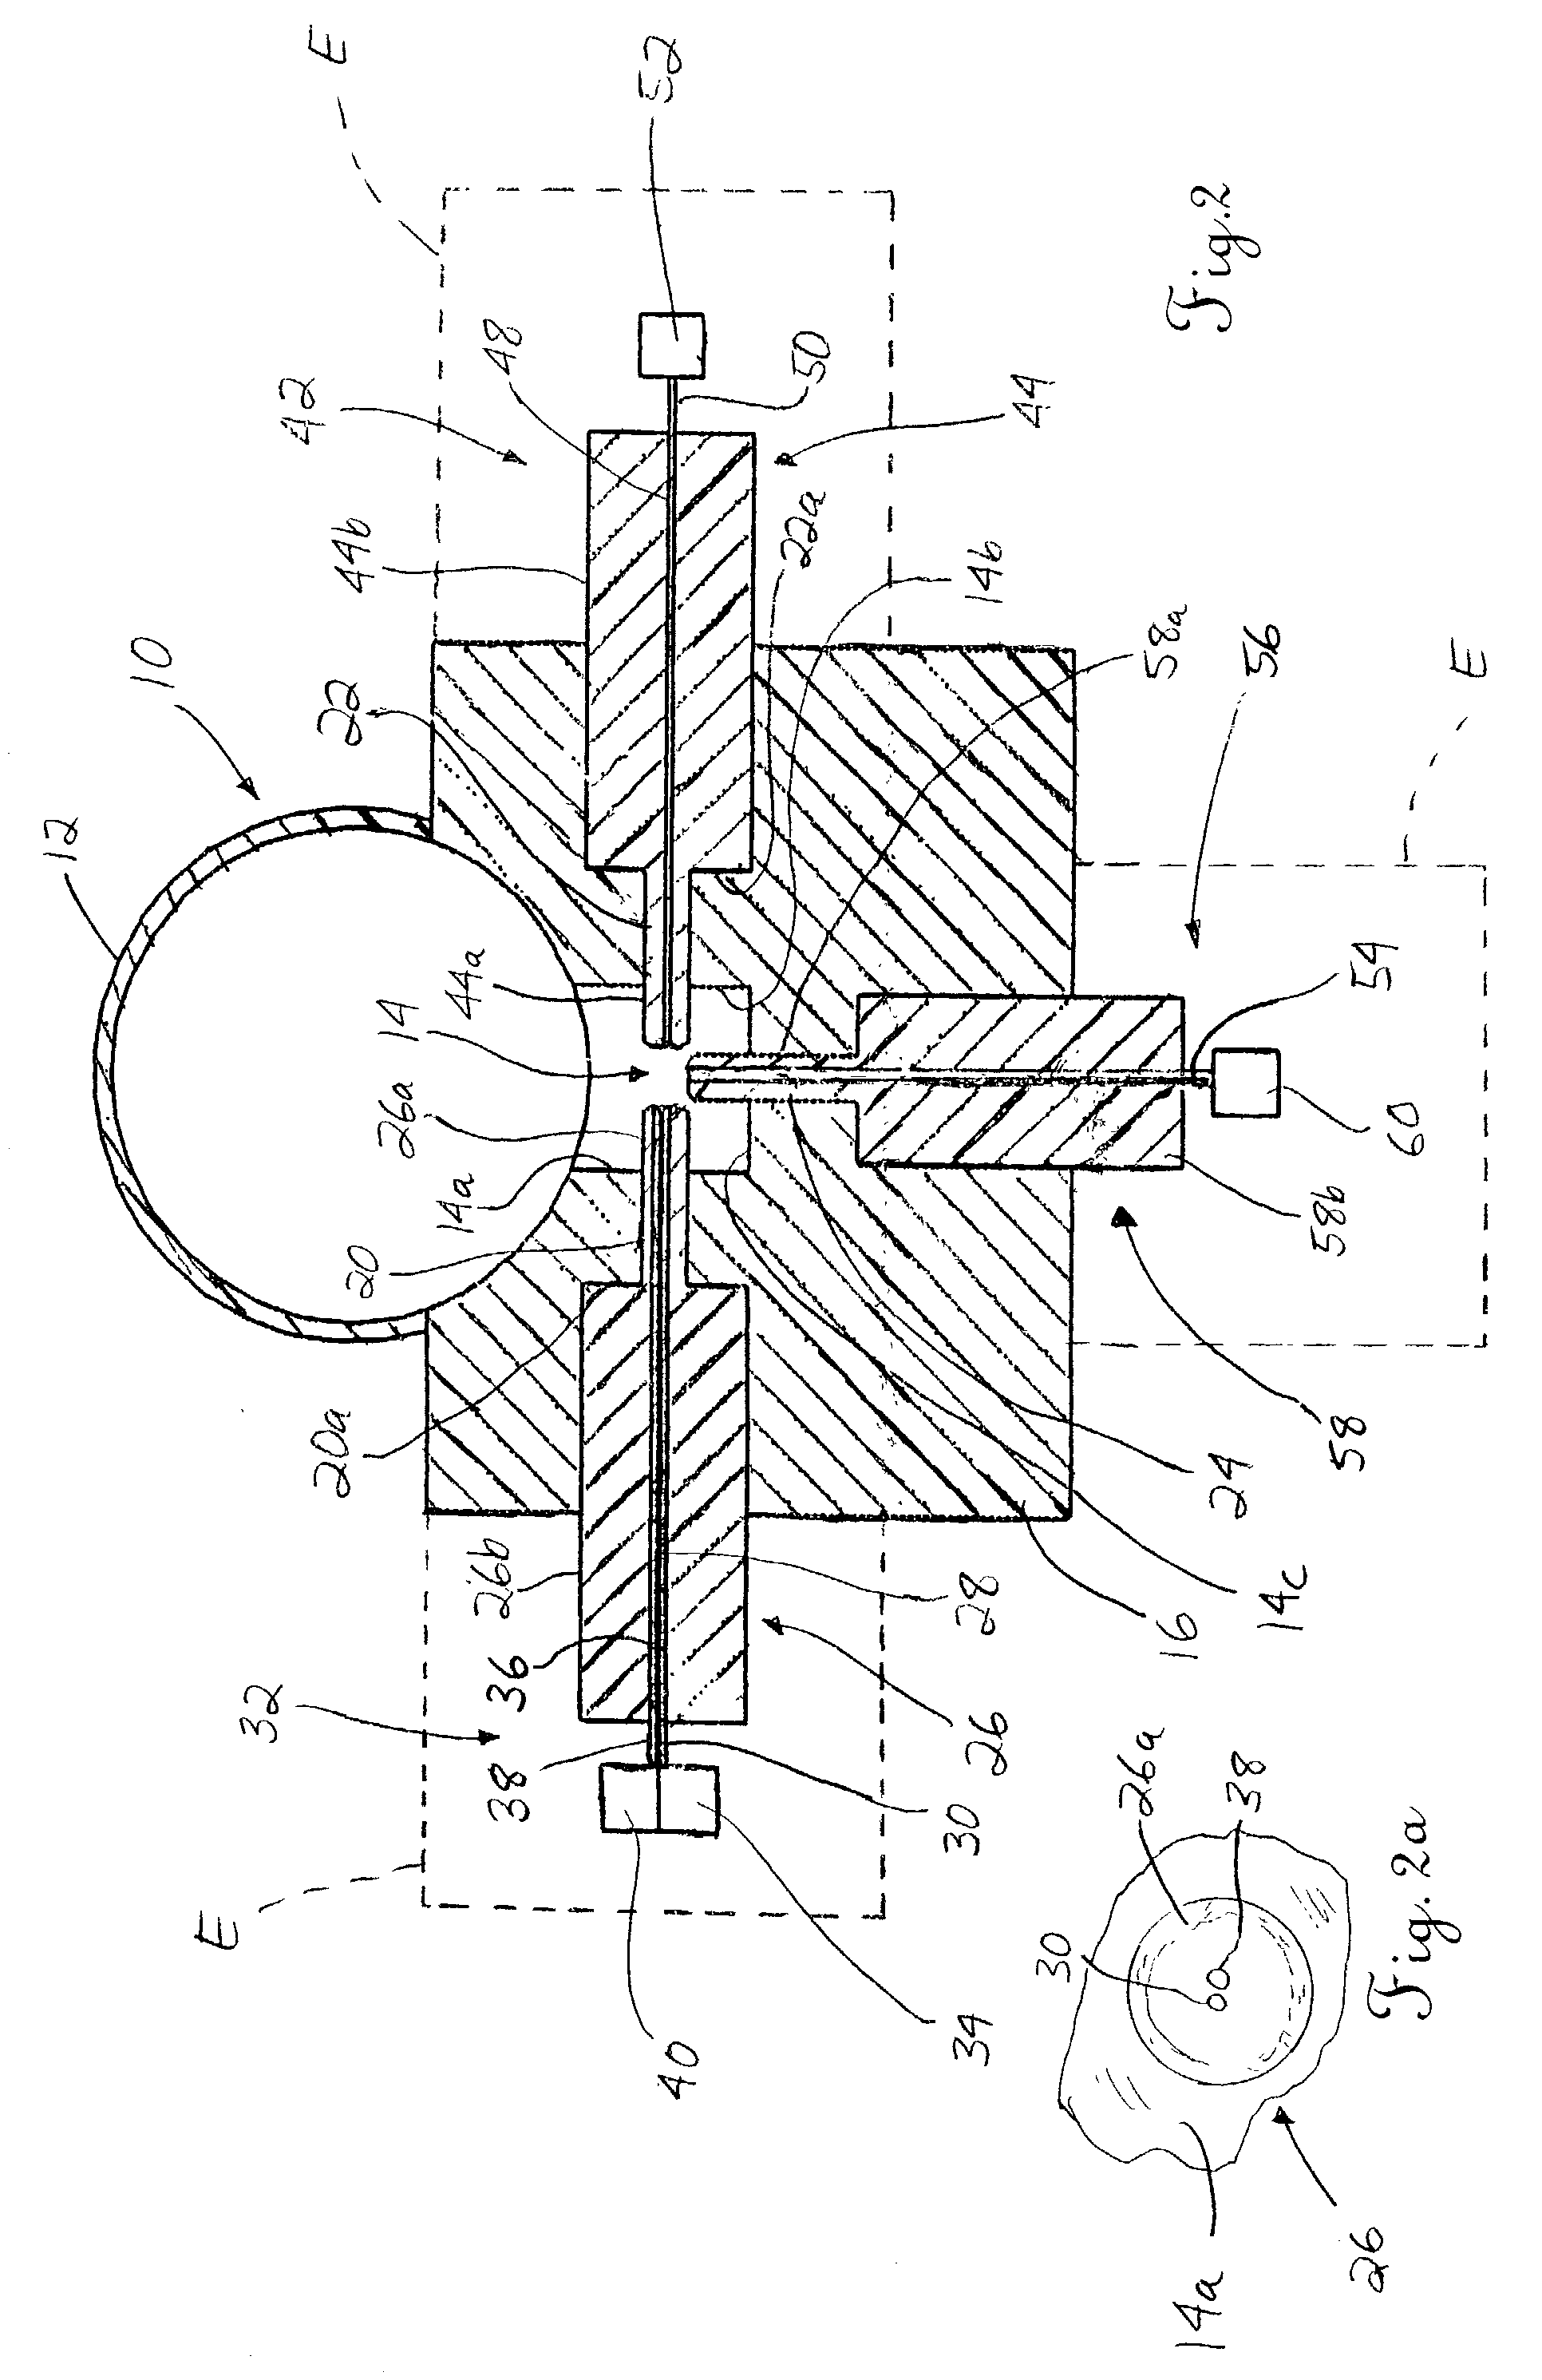 System and method for sensing a characteristic of a fluid and related apparatus